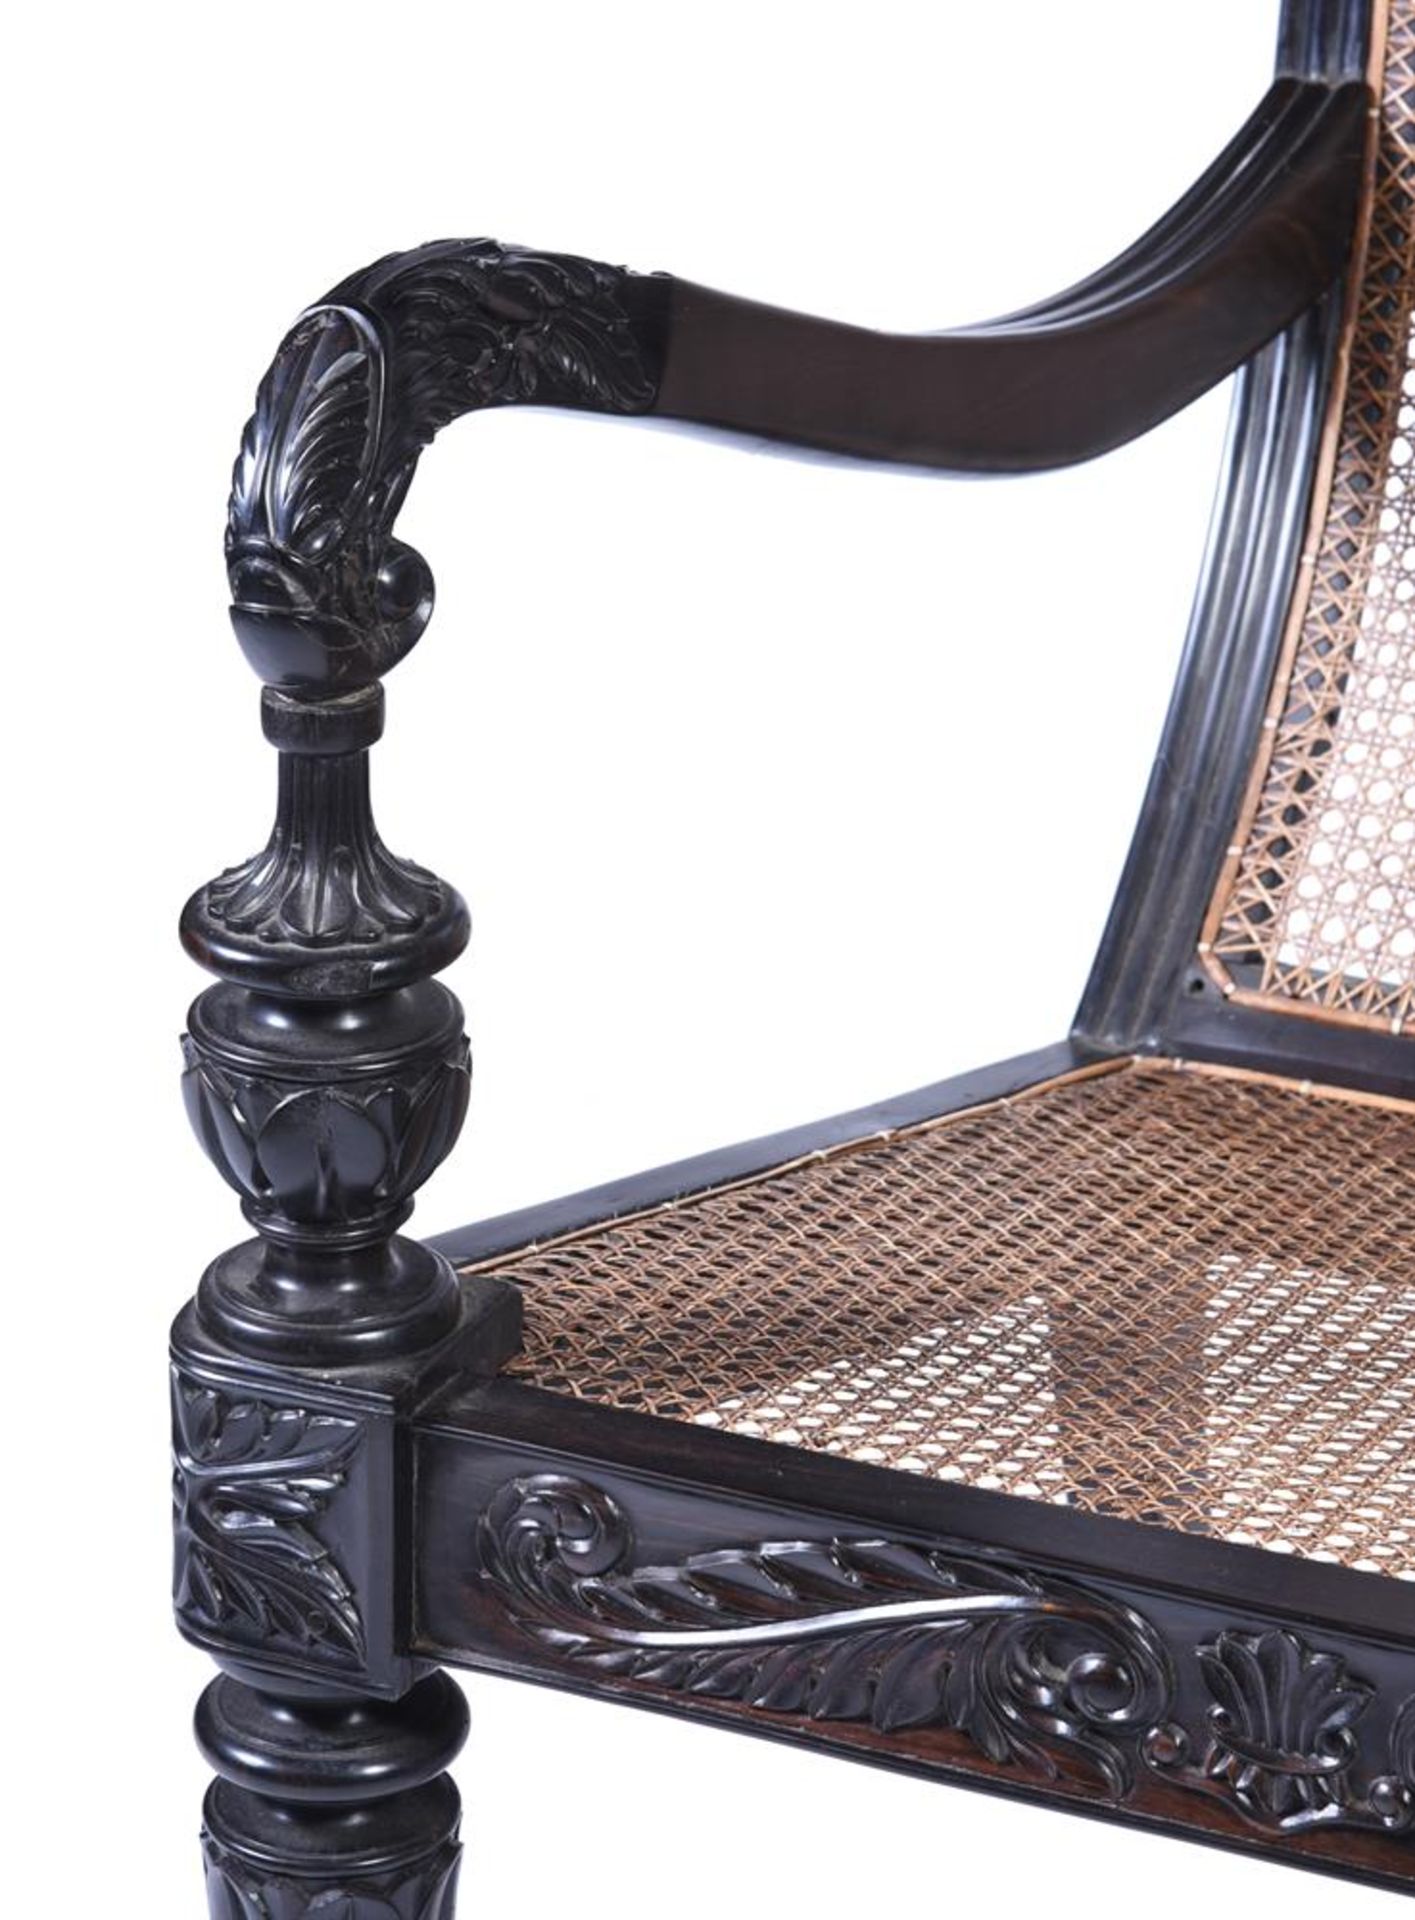 Y A CEYLONESE CARVED EBONY ARMCHAIR, PROBABLY GALLE DISTRICT, FIRST HALF 19TH CENTURY - Image 5 of 5